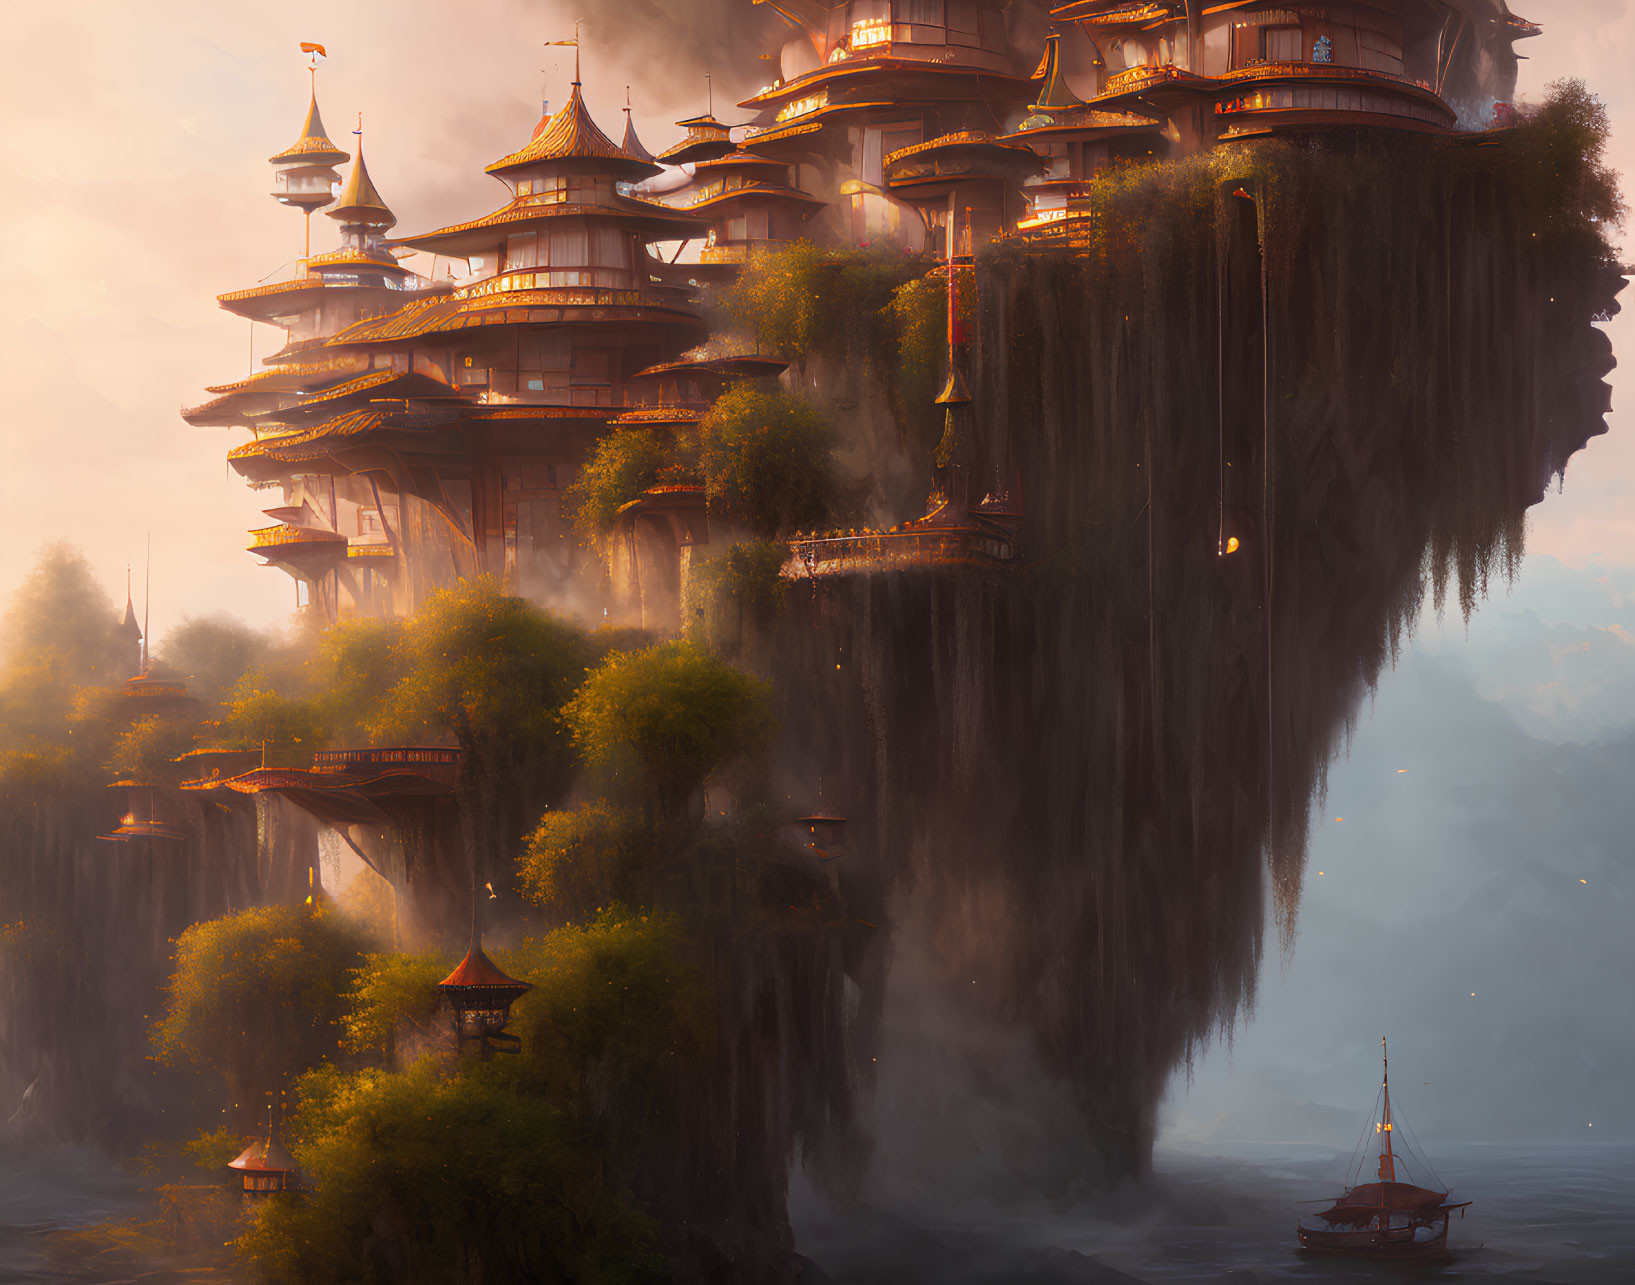 Ethereal floating city with Asian architecture in golden sunset glow